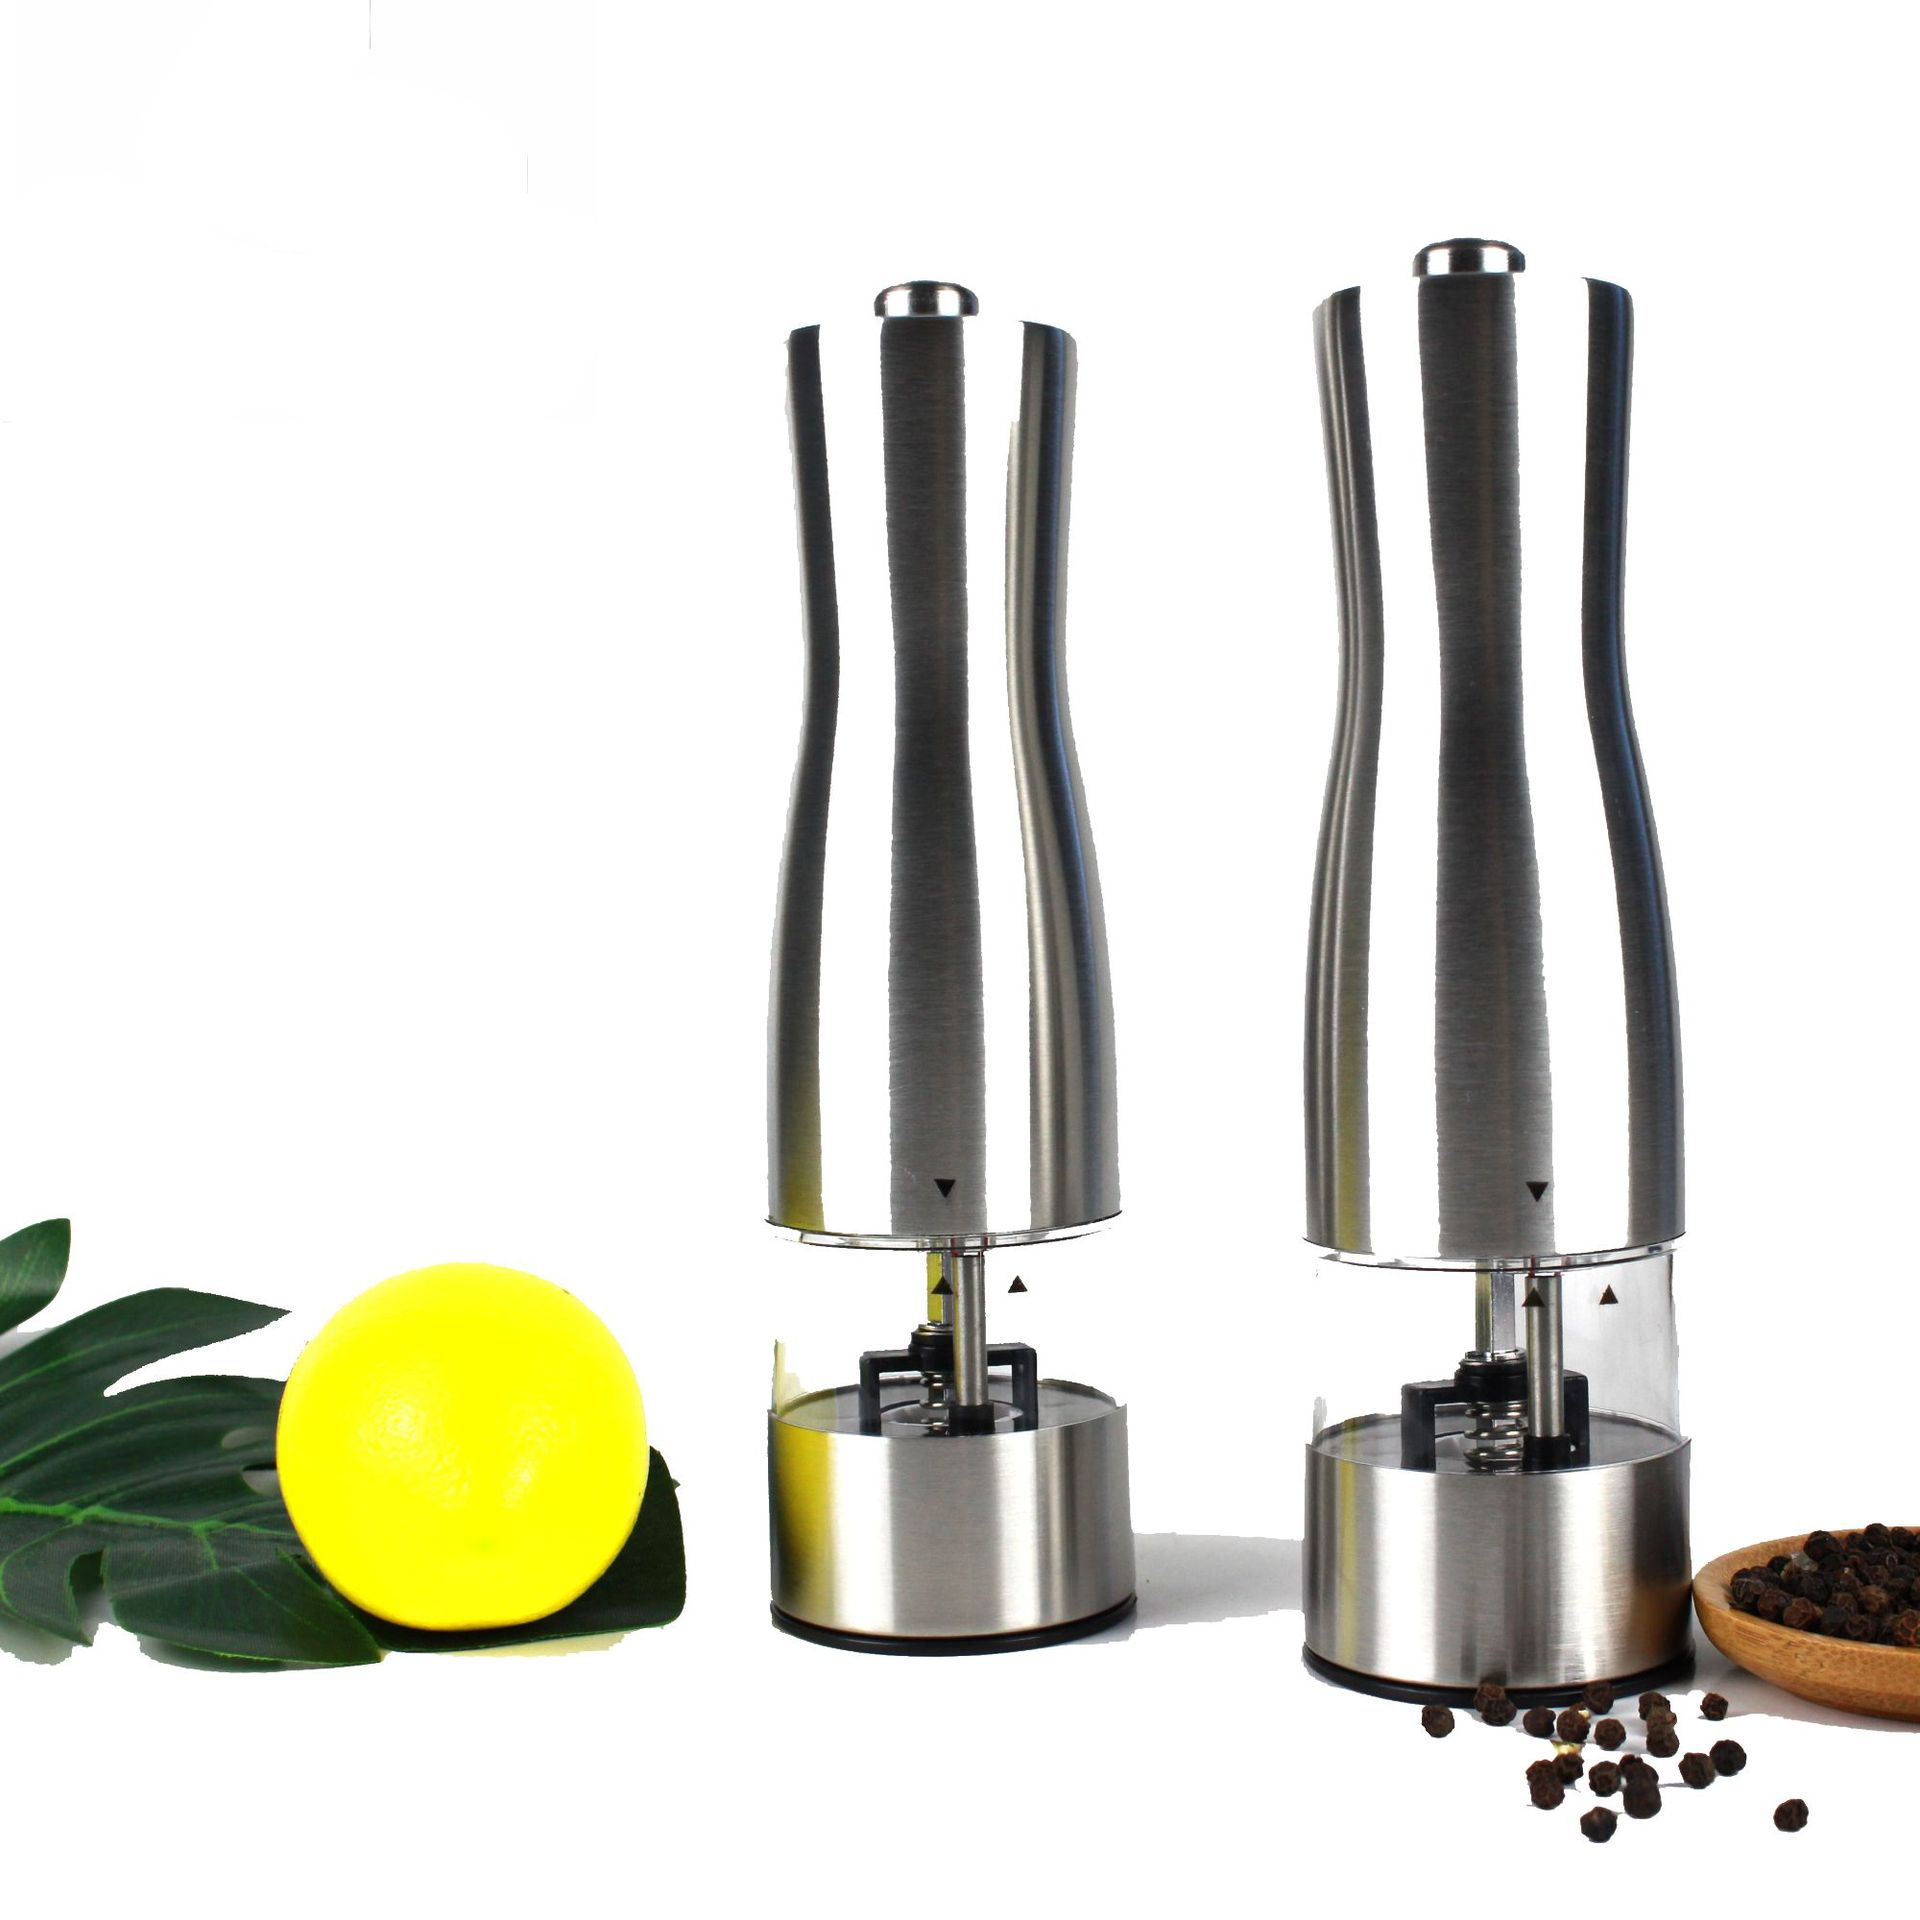 Factory Production Household Portable Stainless Steel Coffee Grinder Manual Grinding Machine Manual Pepper Grinding